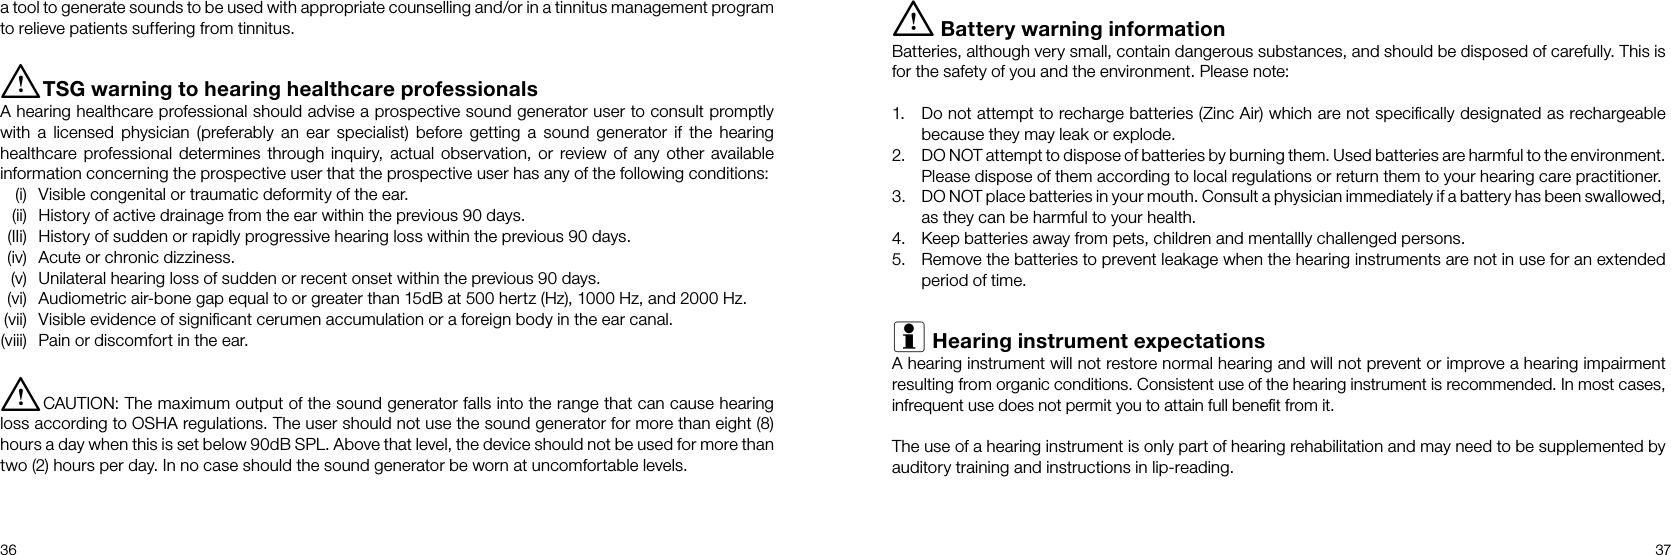 36 37i Battery warning informationBatteries, although very small, contain dangerous substances, and should be disposed of carefully. This is for the safety of you and the environment. Please note:1.  Do not attempt to recharge batteries (Zinc Air) which are not speciﬁcally designated as rechargeable because they may leak or explode.2.  DO NOT attempt to dispose of batteries by burning them. Used batteries are harmful to the environment. Please dispose of them according to local regulations or return them to your hearing care practitioner.3.  DO NOT place batteries in your mouth. Consult a physician immediately if a battery has been swallowed, as they can be harmful to your health.4.  Keep batteries away from pets, children and mentallly challenged persons.5.  Remove the batteries to prevent leakage when the hearing instruments are not in use for an extended period of time.i Hearing instrument expectationsA hearing instrument will not restore normal hearing and will not prevent or improve a hearing impairment  resulting from organic conditions. Consistent use of the hearing instrument is recommended. In most cases, infrequent use does not permit you to attain full beneﬁt from it.The use of a hearing instrument is only part of hearing rehabilitation and may need to be supplemented by auditory training and instructions in lip-reading.a tool to generate sounds to be used with appropriate counselling and/or in a tinnitus management program to relieve patients suffering from tinnitus.i TSG warning to hearing healthcare professionalsA hearing healthcare professional should advise a prospective sound generator user to consult promptly with a licensed physician (preferably an ear specialist) before getting a sound generator if the hearing healthcare professional determines through inquiry, actual observation, or review of any other available information concerning the prospective user that the prospective user has any of the following conditions:  (i)  Visible congenital or traumatic deformity of the ear.  (ii)  History of active drainage from the ear within the previous 90 days.  (IIi)  History of sudden or rapidly progressive hearing loss within the previous 90 days.  (iv)  Acute or chronic dizziness.  (v)  Unilateral hearing loss of sudden or recent onset within the previous 90 days.  (vi)  Audiometric air-bone gap equal to or greater than 15dB at 500 hertz (Hz), 1000 Hz, and 2000 Hz. (vii)  Visible evidence of signiﬁcant cerumen accumulation or a foreign body in the ear canal. (viii)  Pain or discomfort in the ear.i CAUTION: The maximum output of the sound generator falls into the range that can cause hearing loss according to OSHA regulations. The user should not use the sound generator for more than eight (8) hours a day when this is set below 90dB SPL. Above that level, the device should not be used for more than two (2) hours per day. In no case should the sound generator be worn at uncomfortable levels.